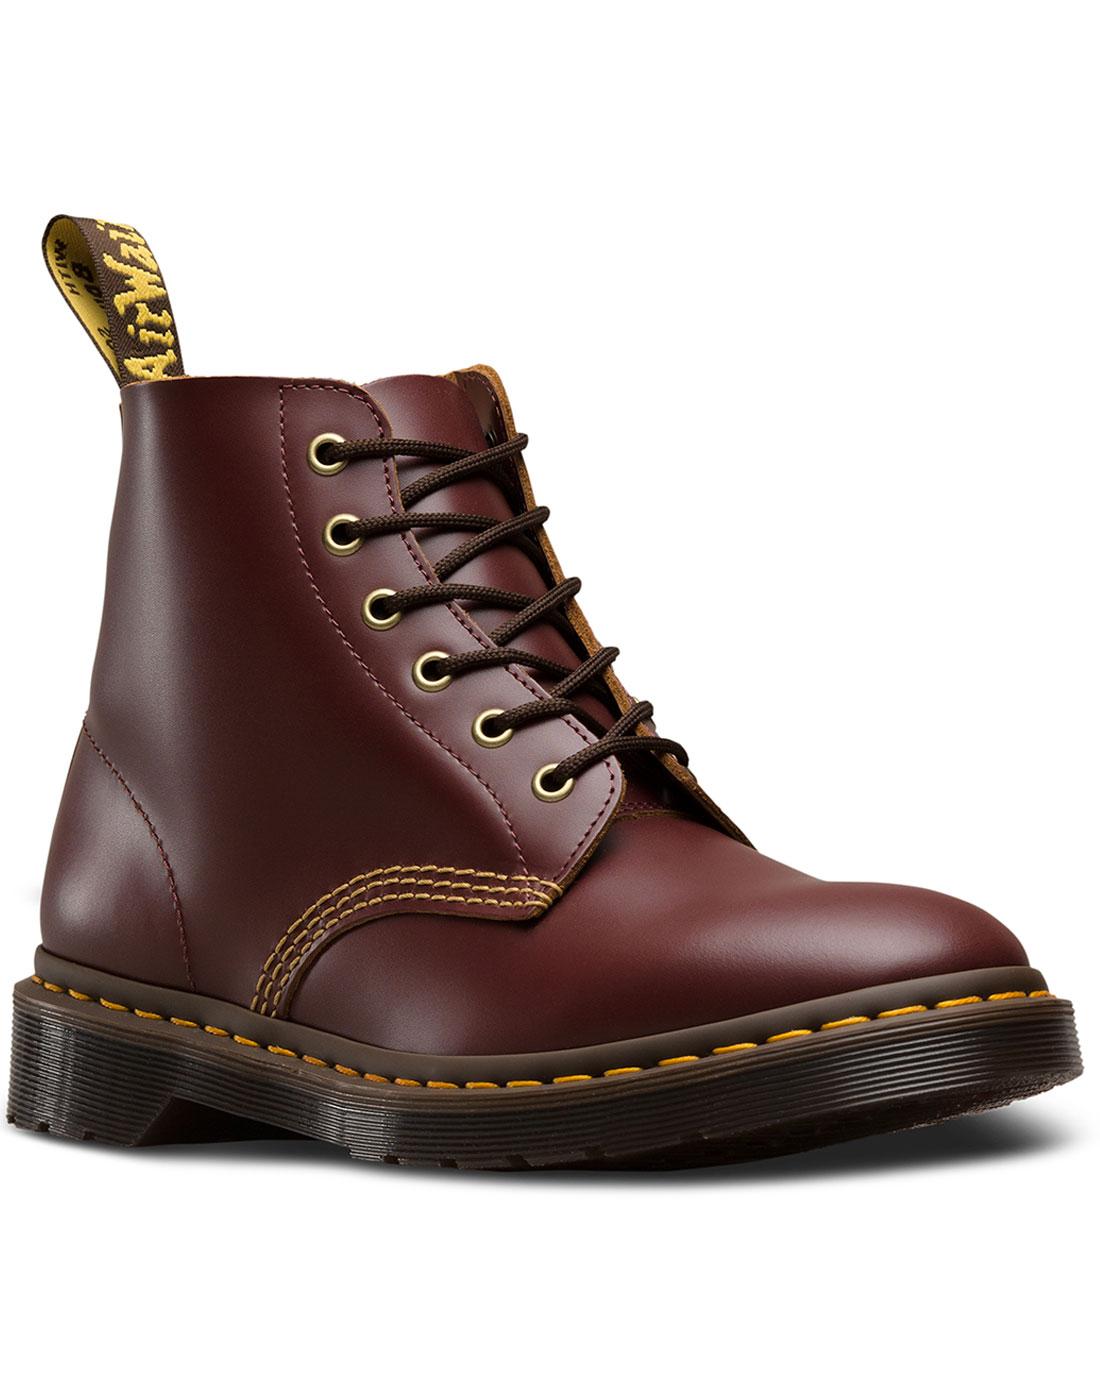 101 Archive DR MARTENS Mod 6 Eyelet Ankle Boots O